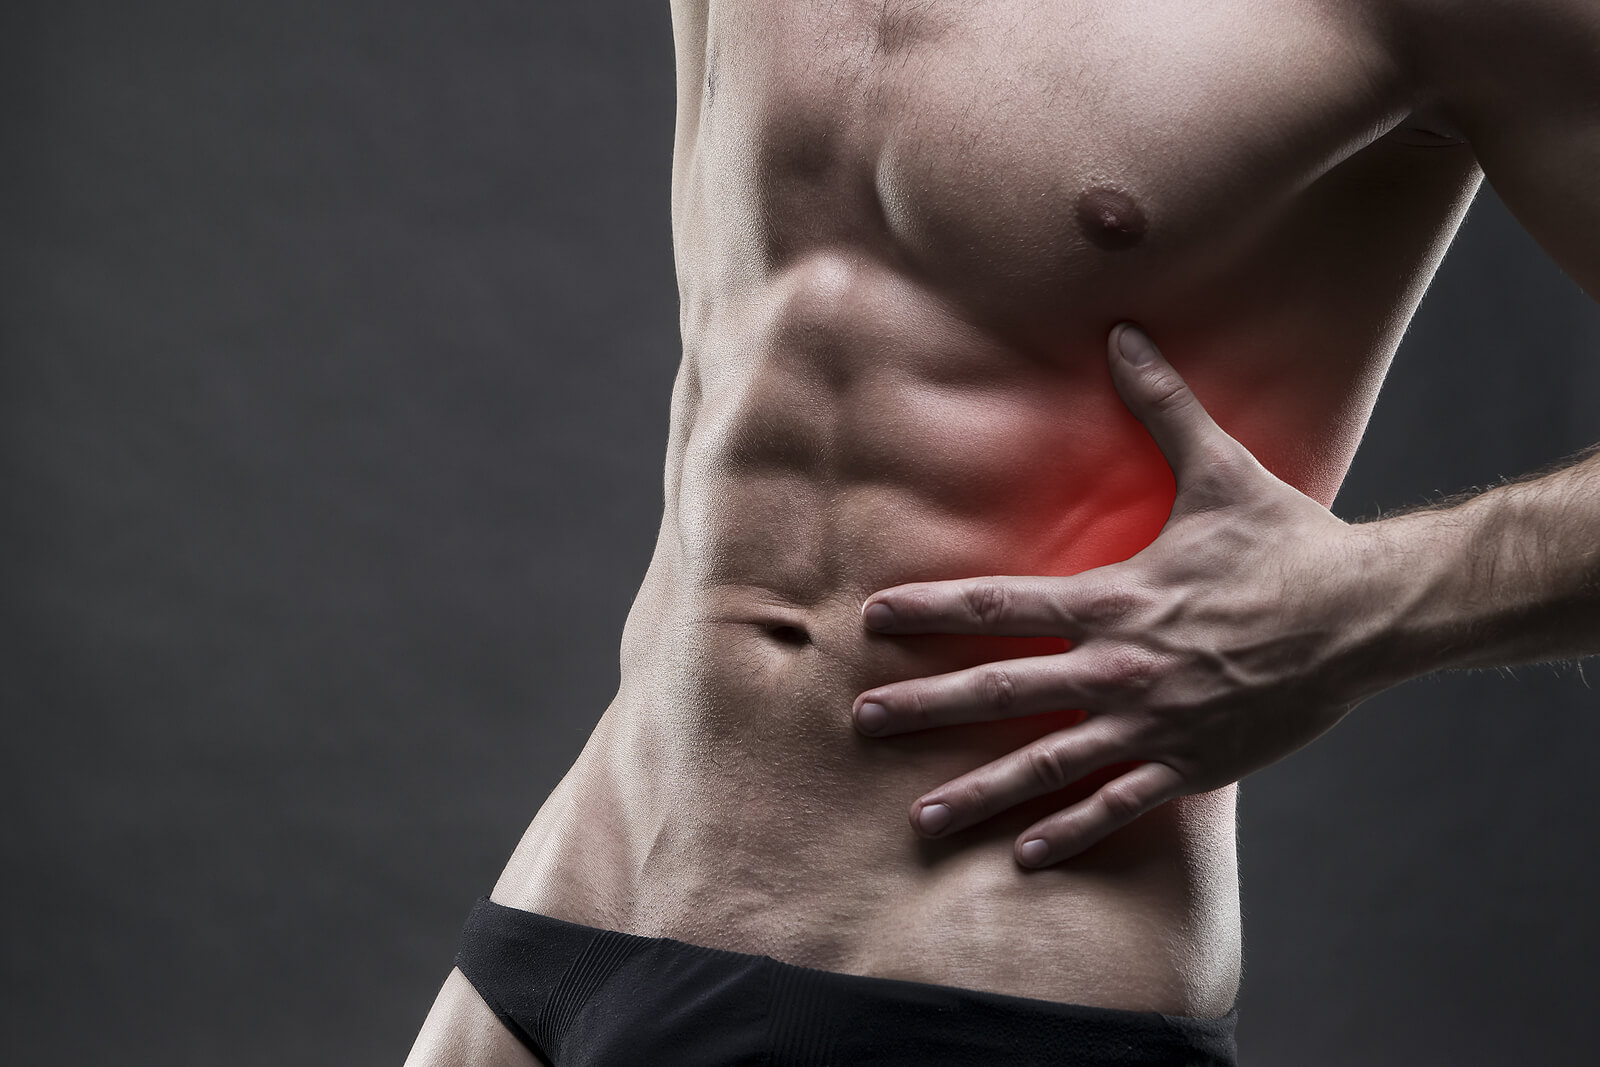 Sore ab muscles on a male body